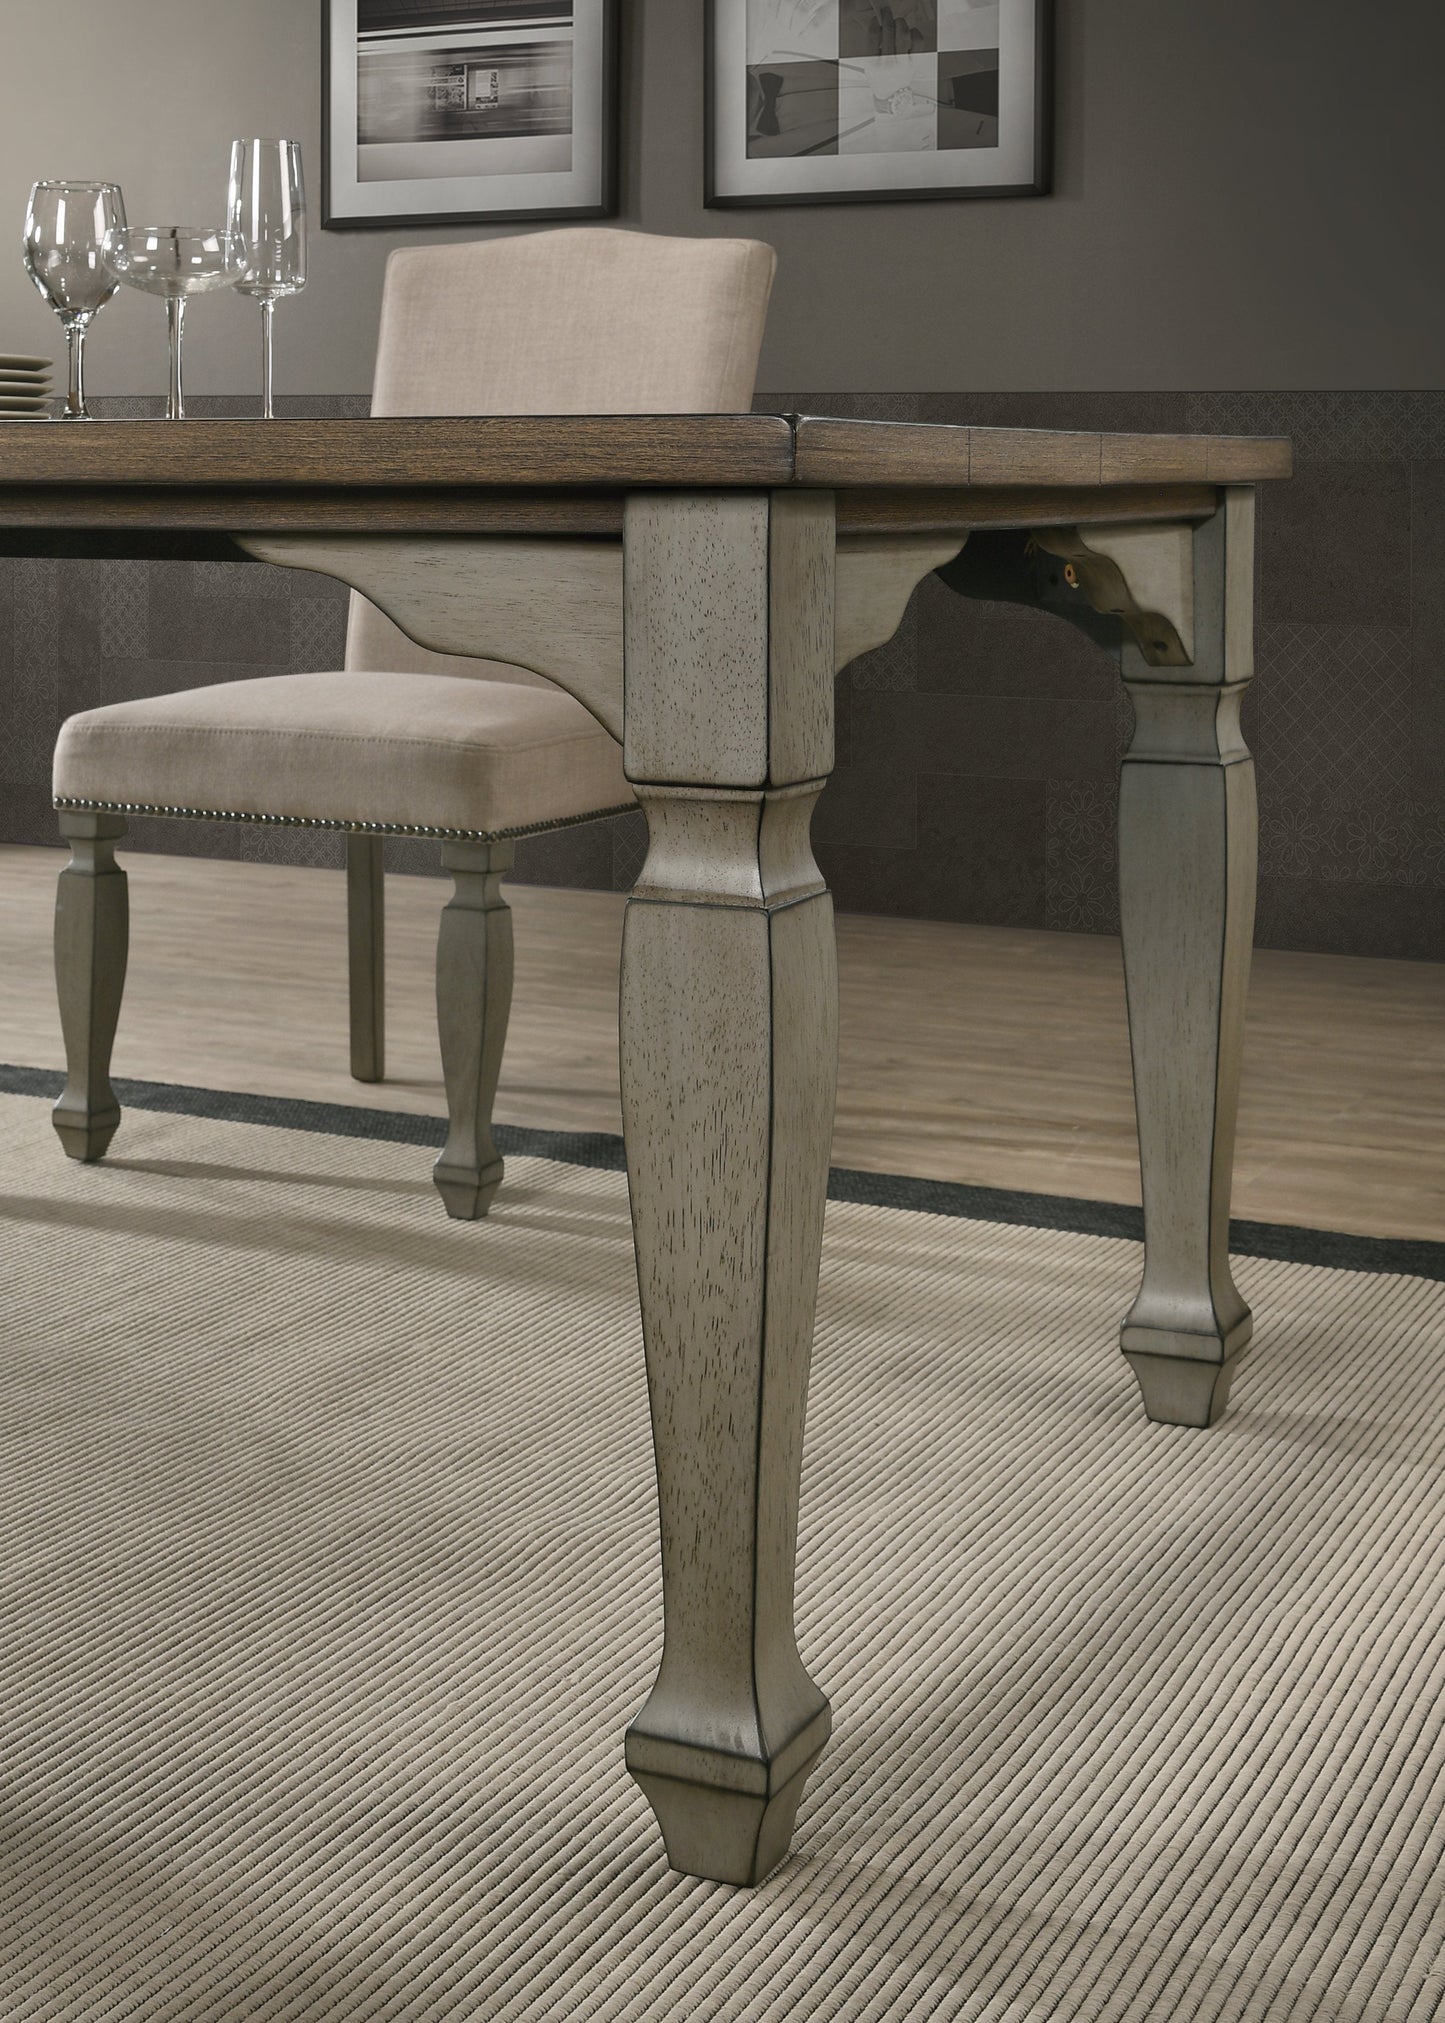 Breda Antique Gray and Dark Oak Finished Wood Dining Table